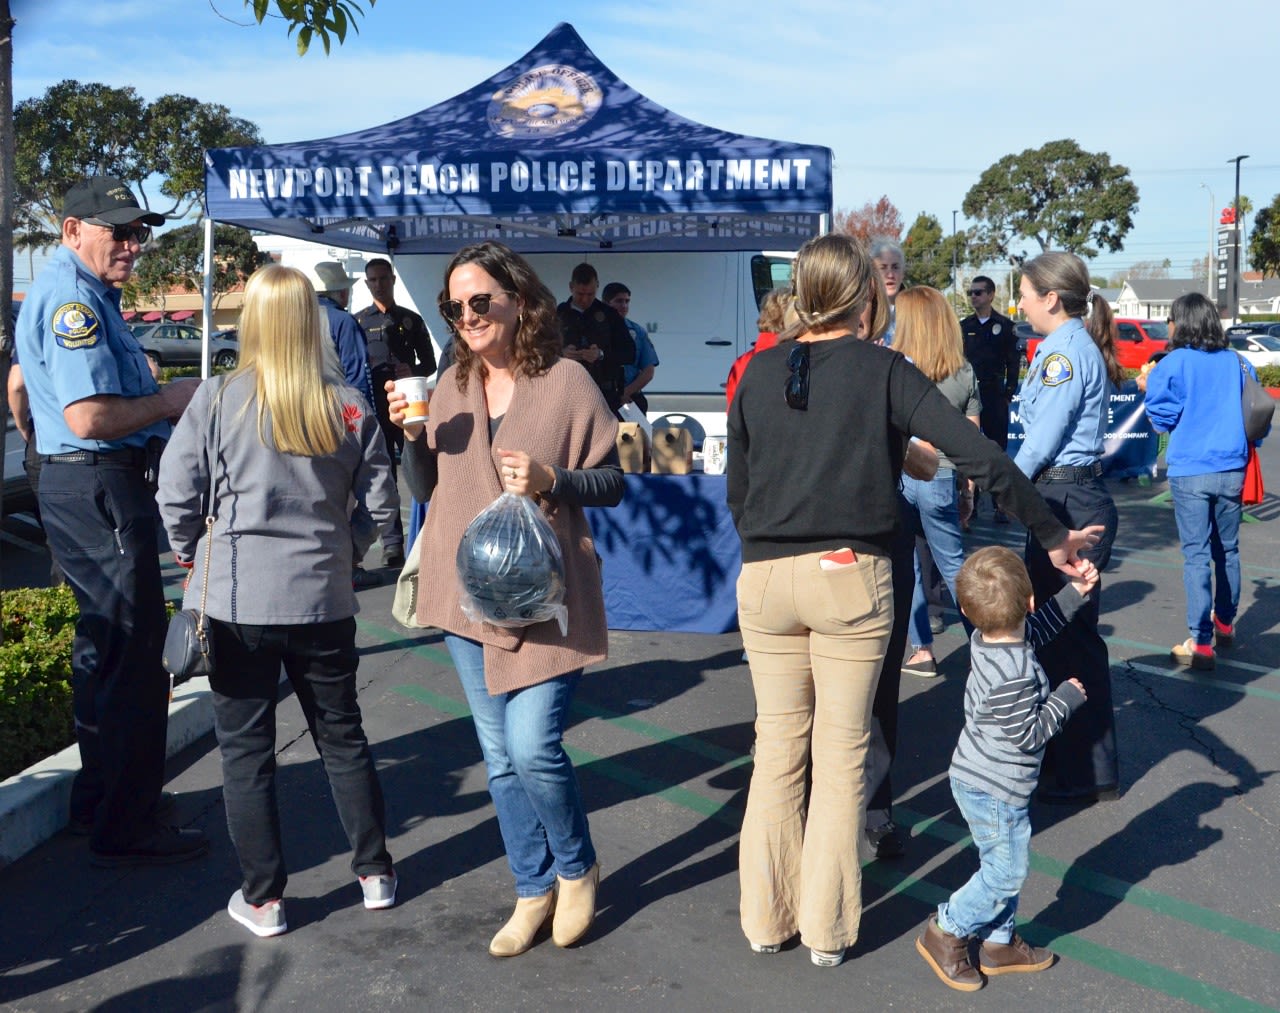 Around Town: Newport Beach Police Department to host mobile cafe